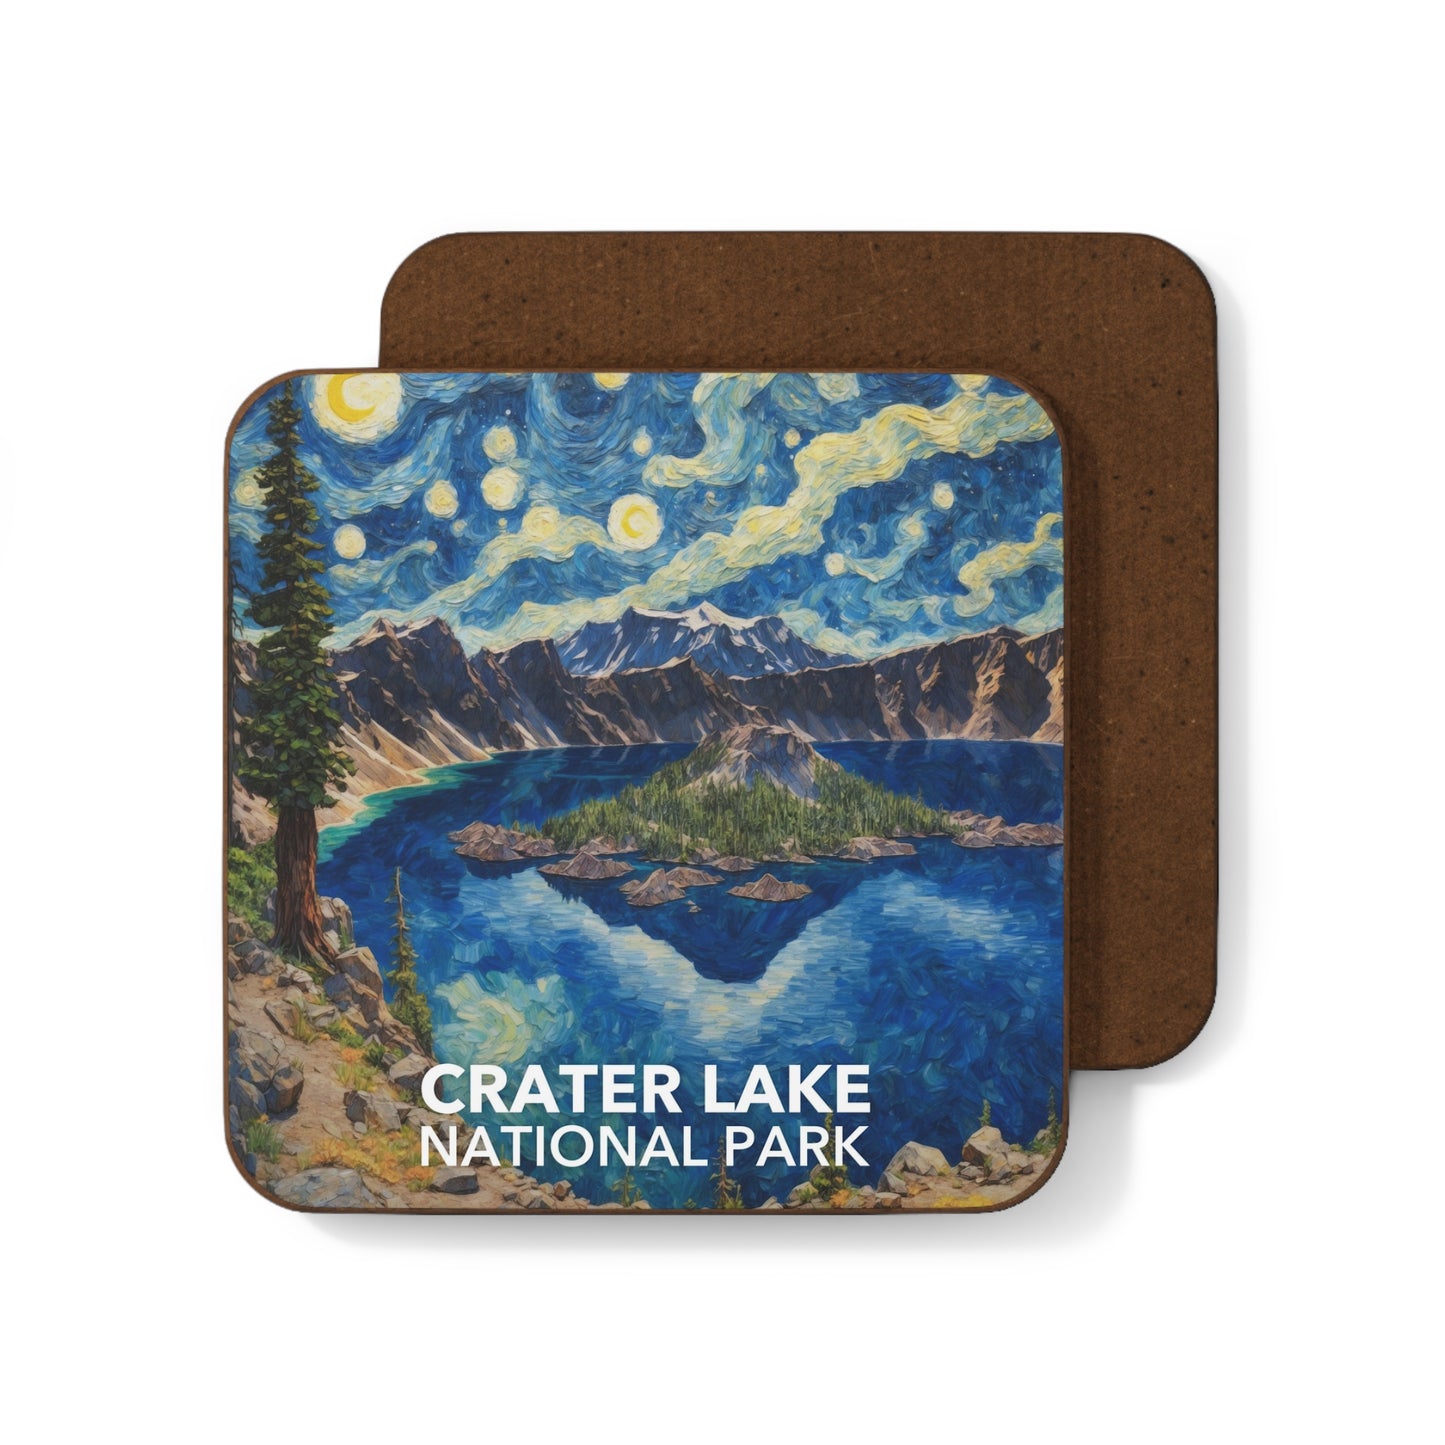 Crater Lake National Park Coaster - The Starry Night